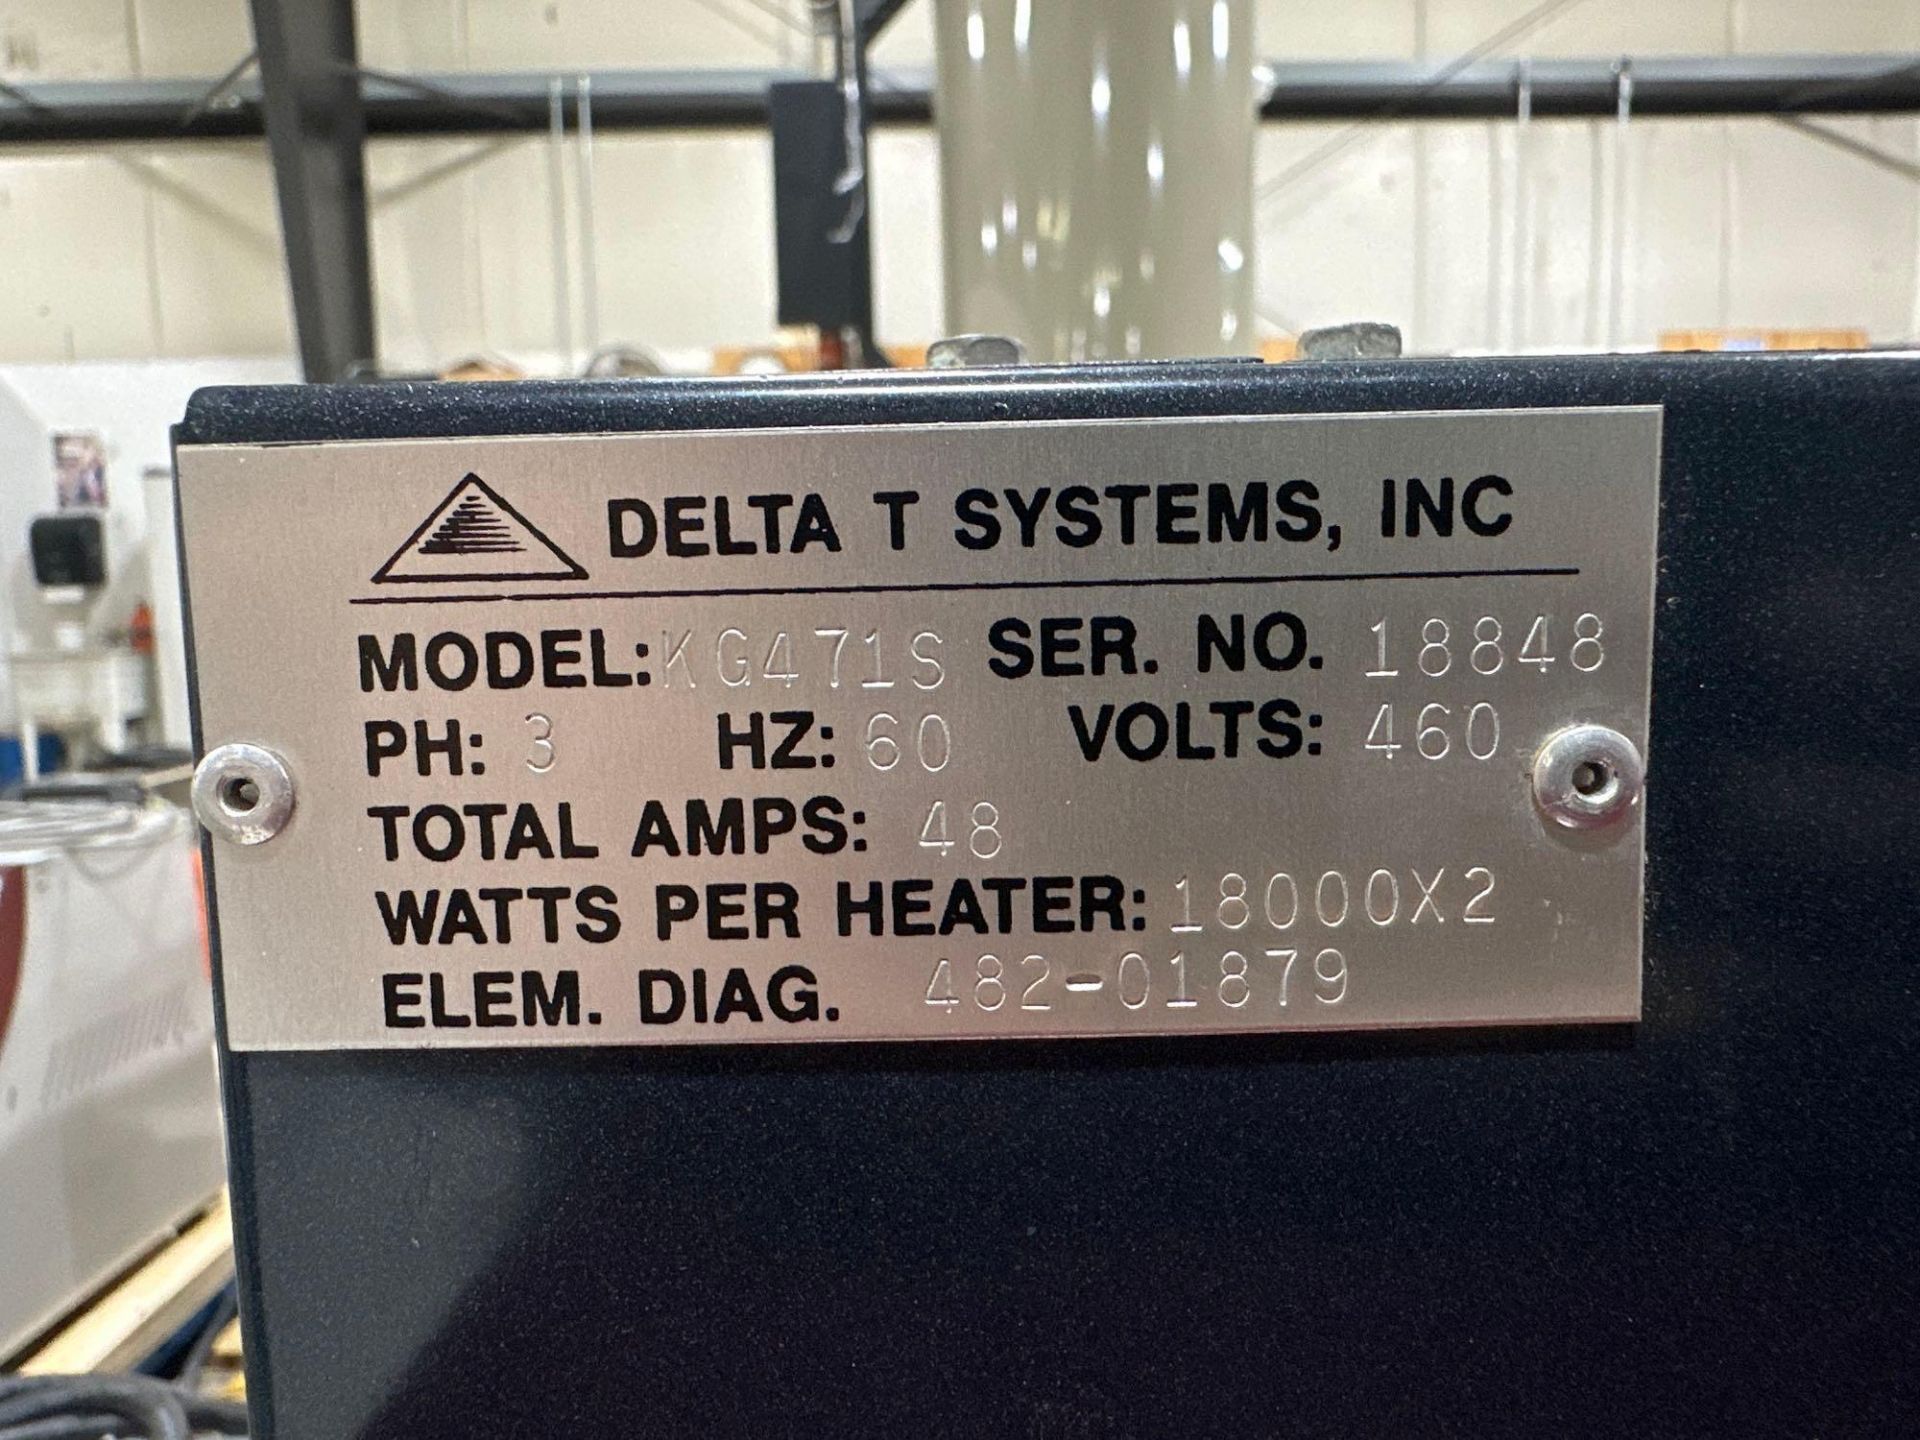 Delta T Systems KG471S Thermolator, 3hp, Dual Heater, 18kw, s/n 18848 - Image 7 of 7